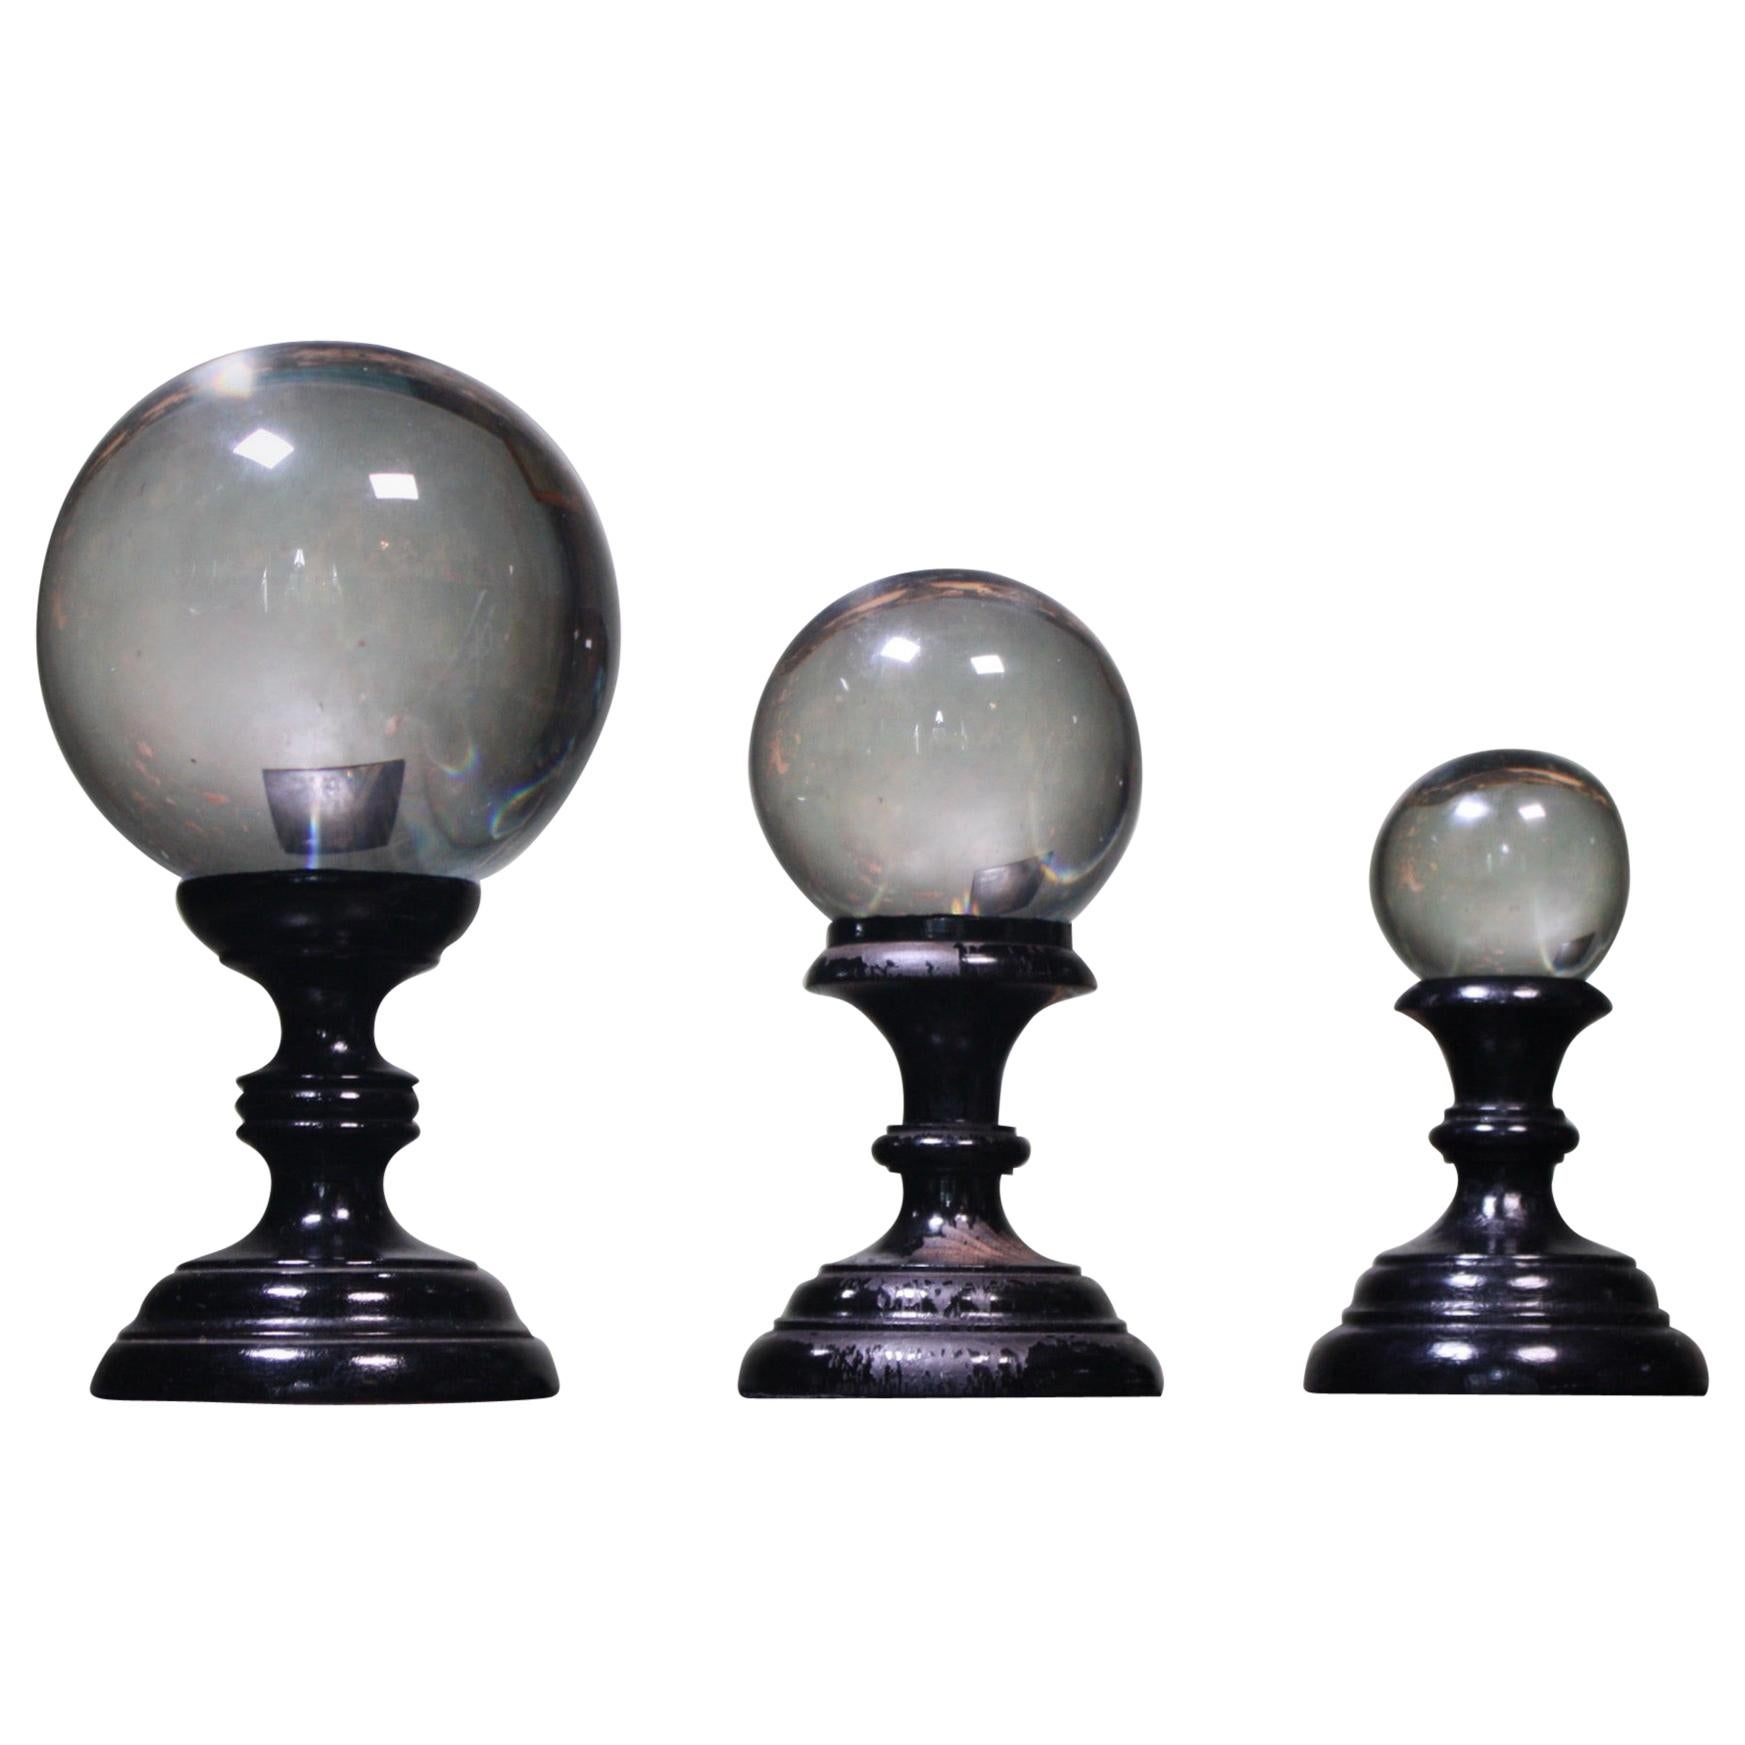 Early 20th Century Trio of Graduated Glass Optical Scientific Spheres